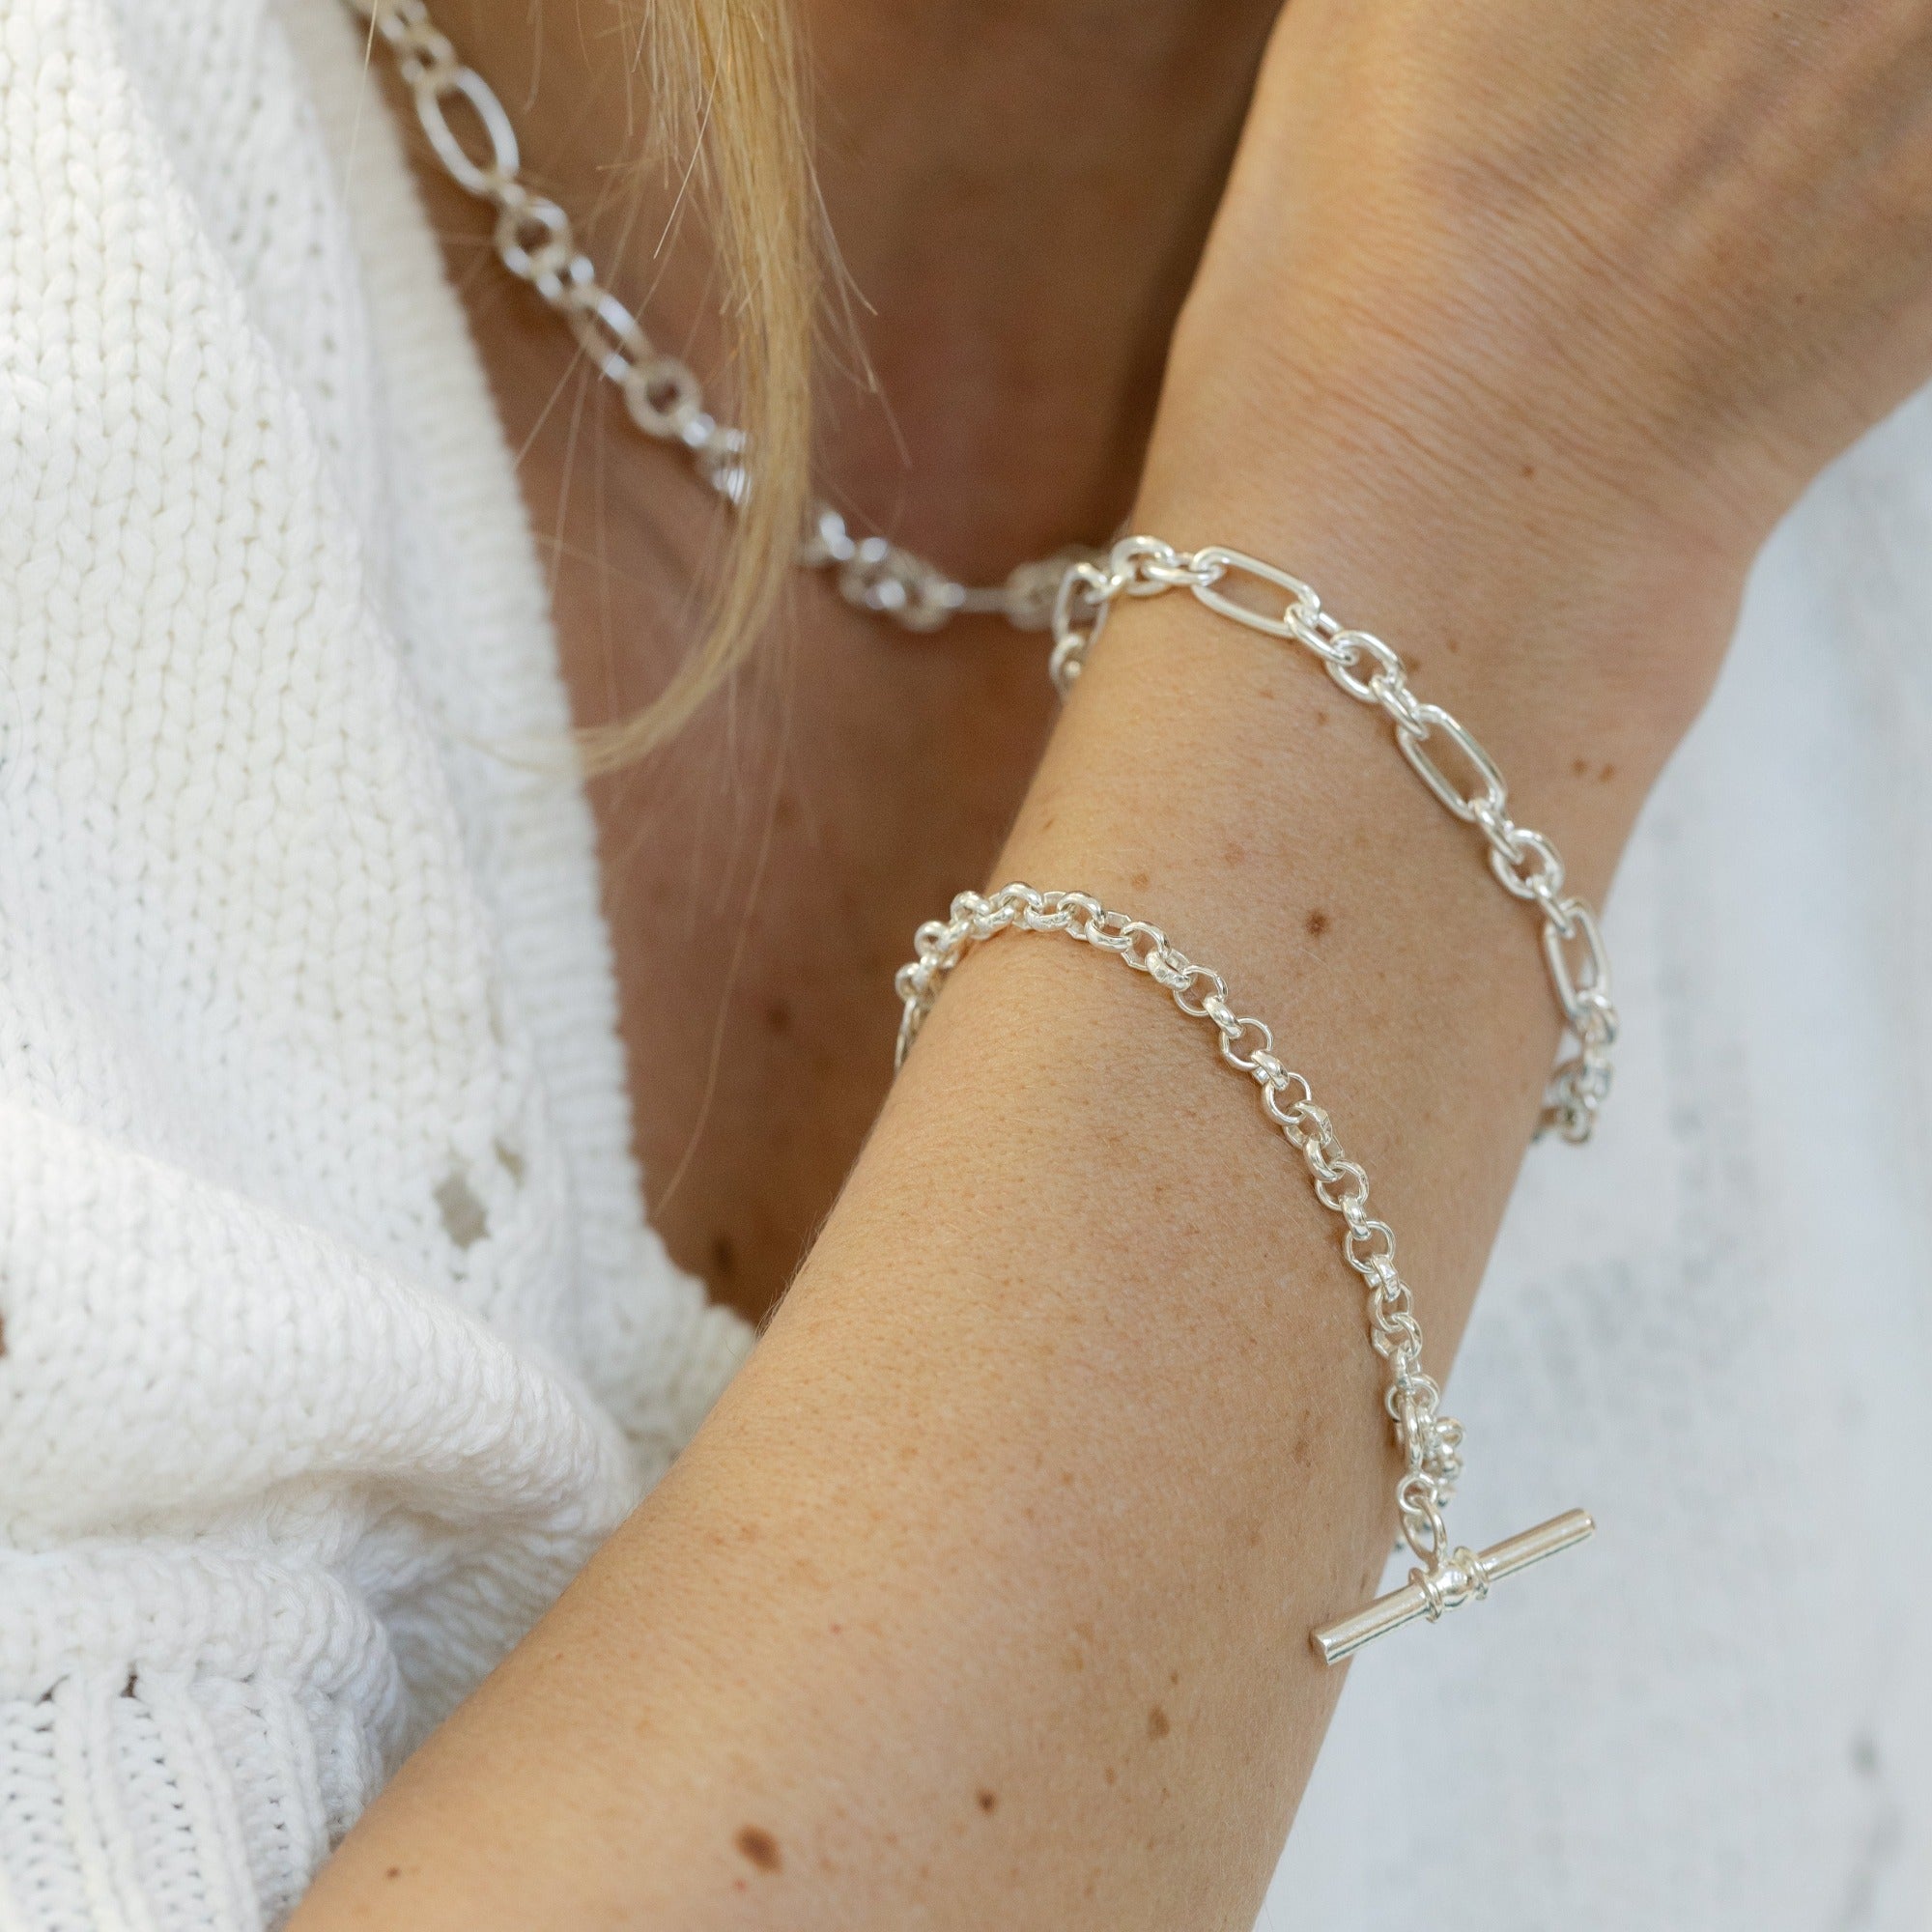 Silver Chain Bracelet - Fetter (7 or 7.5" chain available)